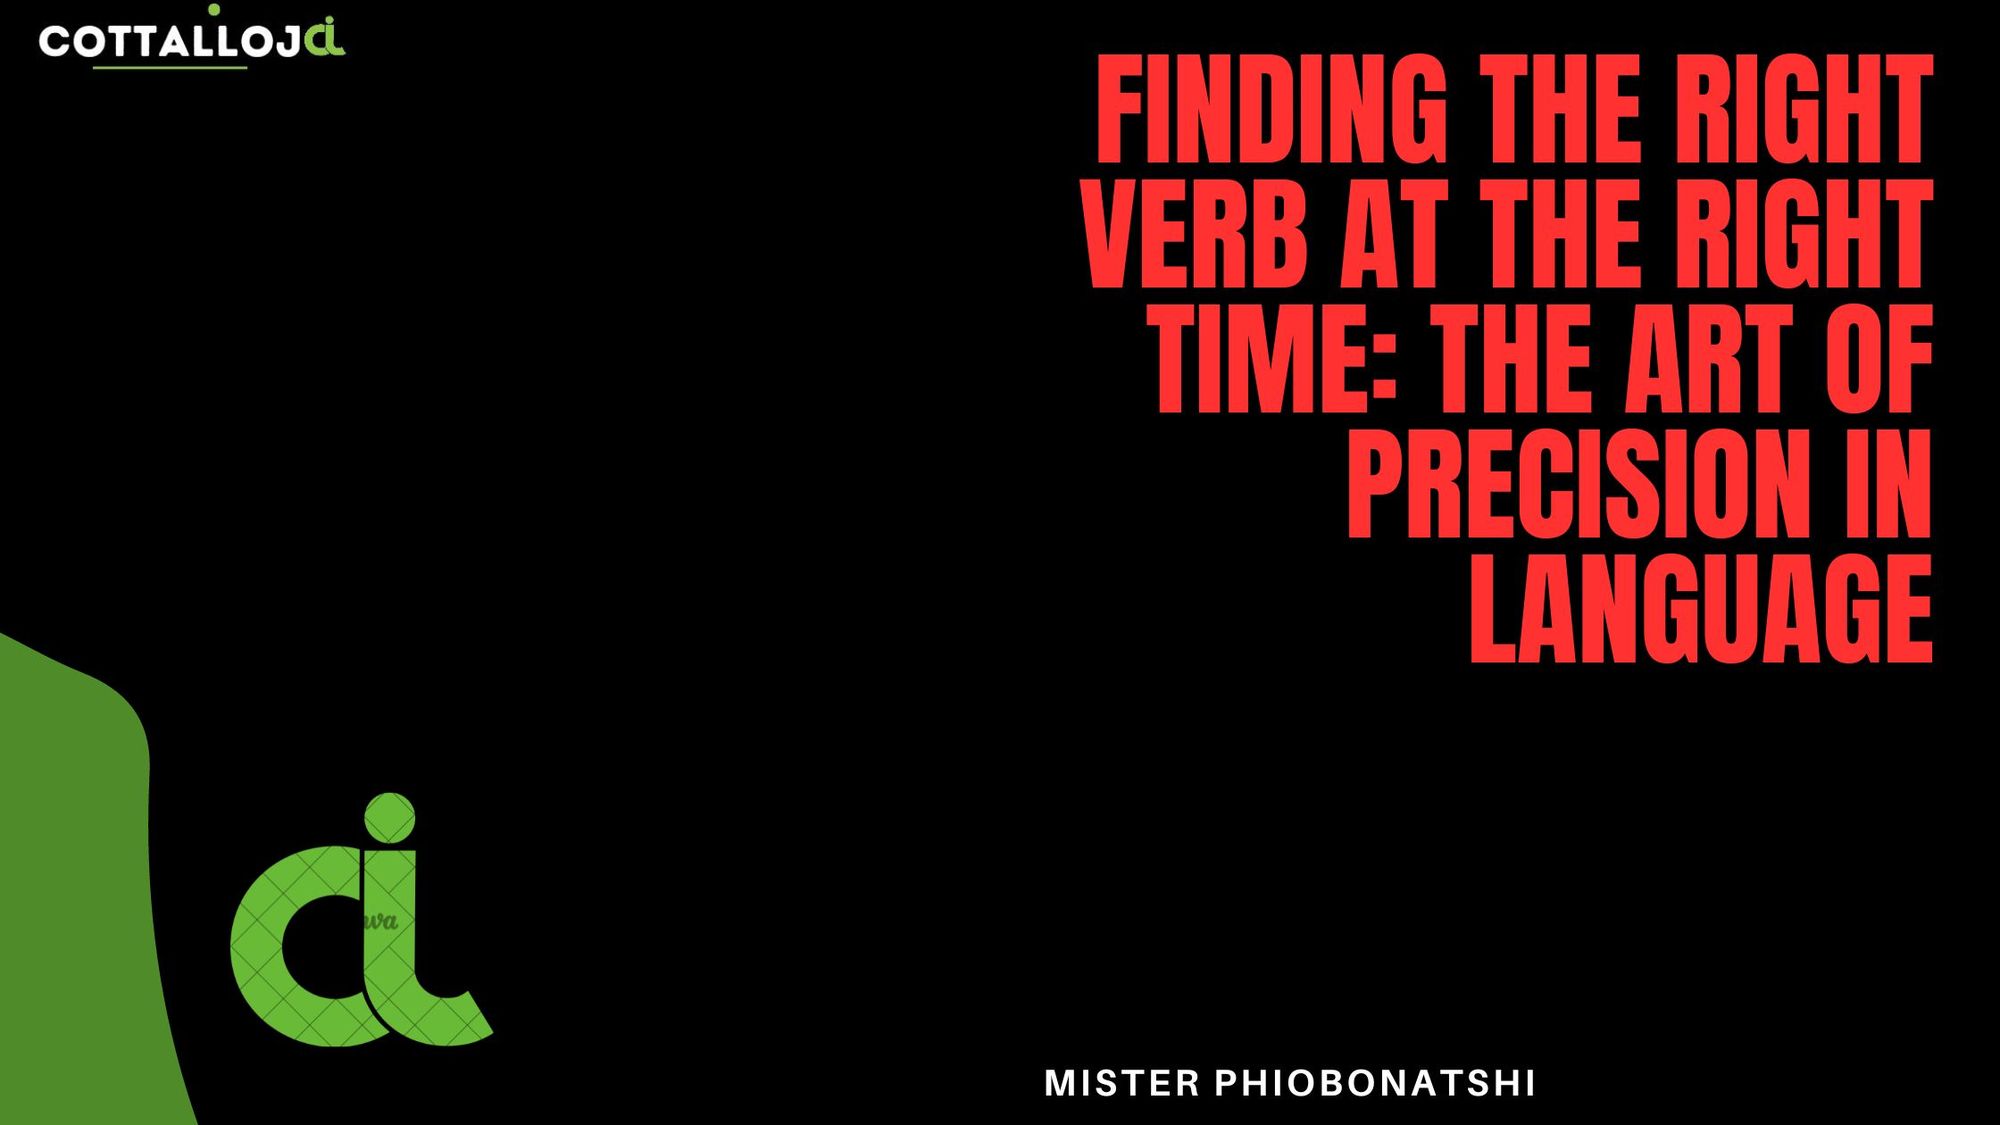 Finding the Right Verb at the Right Time: The Art of Precision in Language